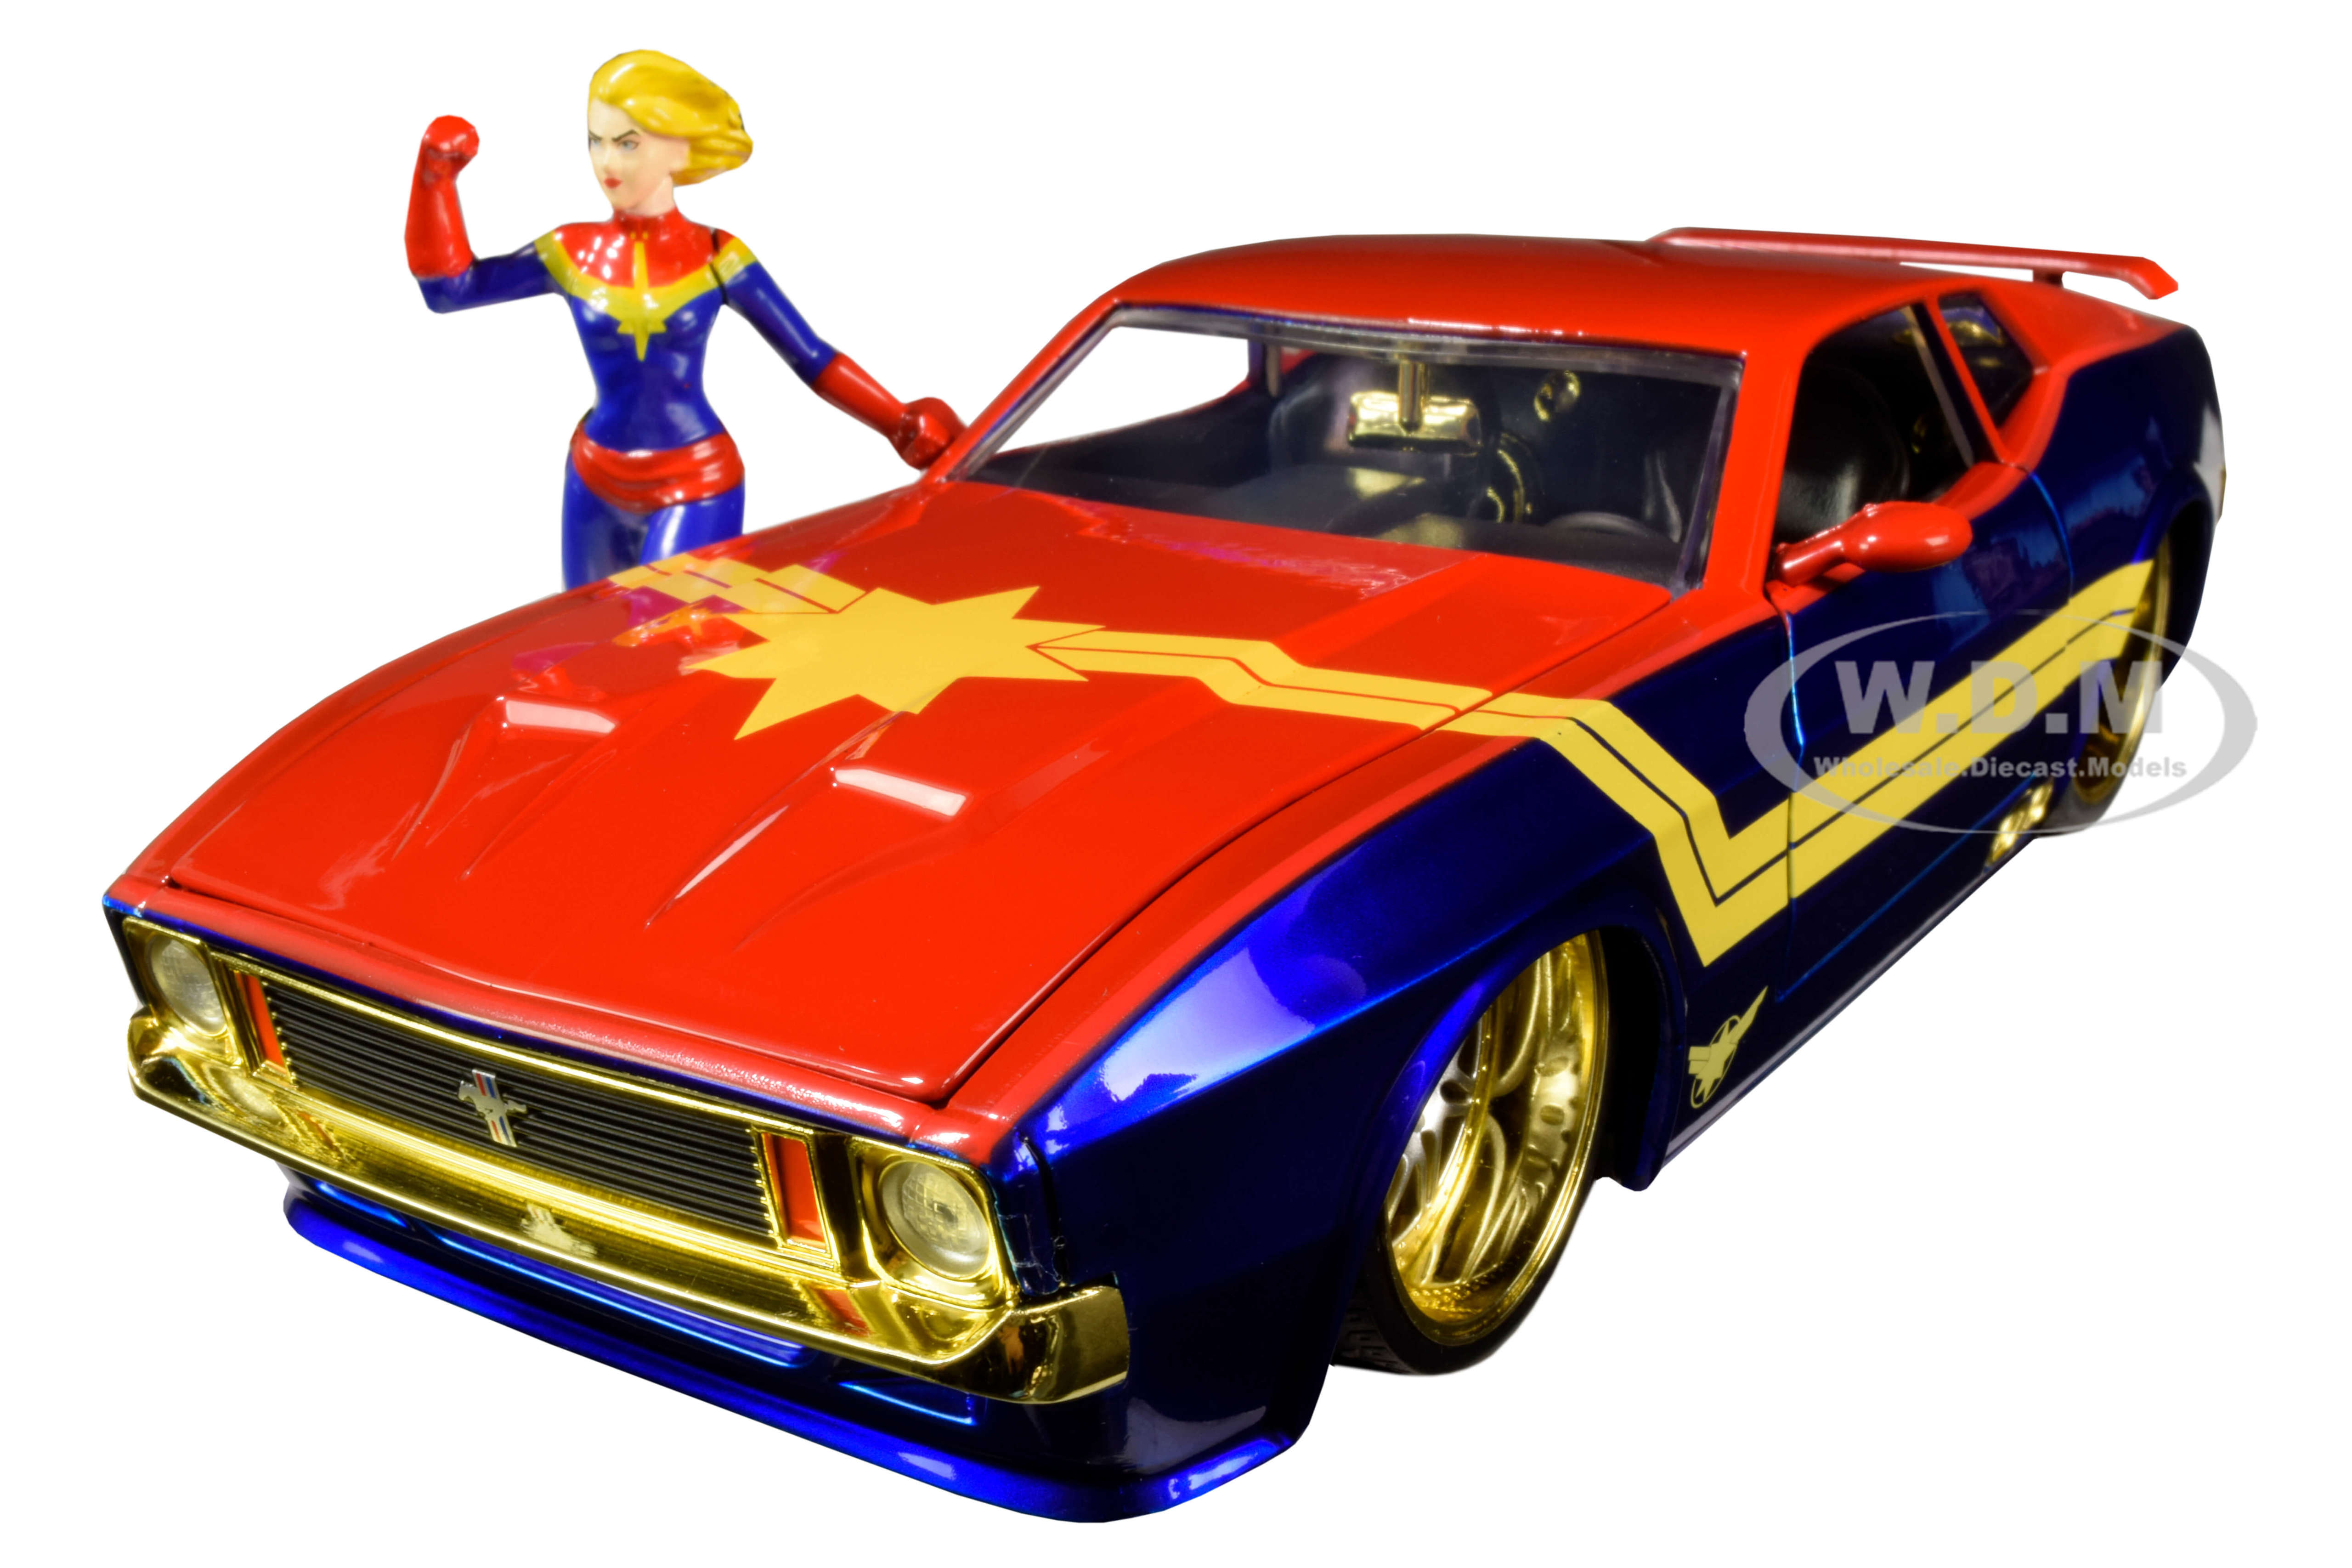 1973 Ford Mustang Mach 1 with Captain Marvel Diecast Figurine Avengers Marvel Series 1/24 Diecast Model Car by Jada